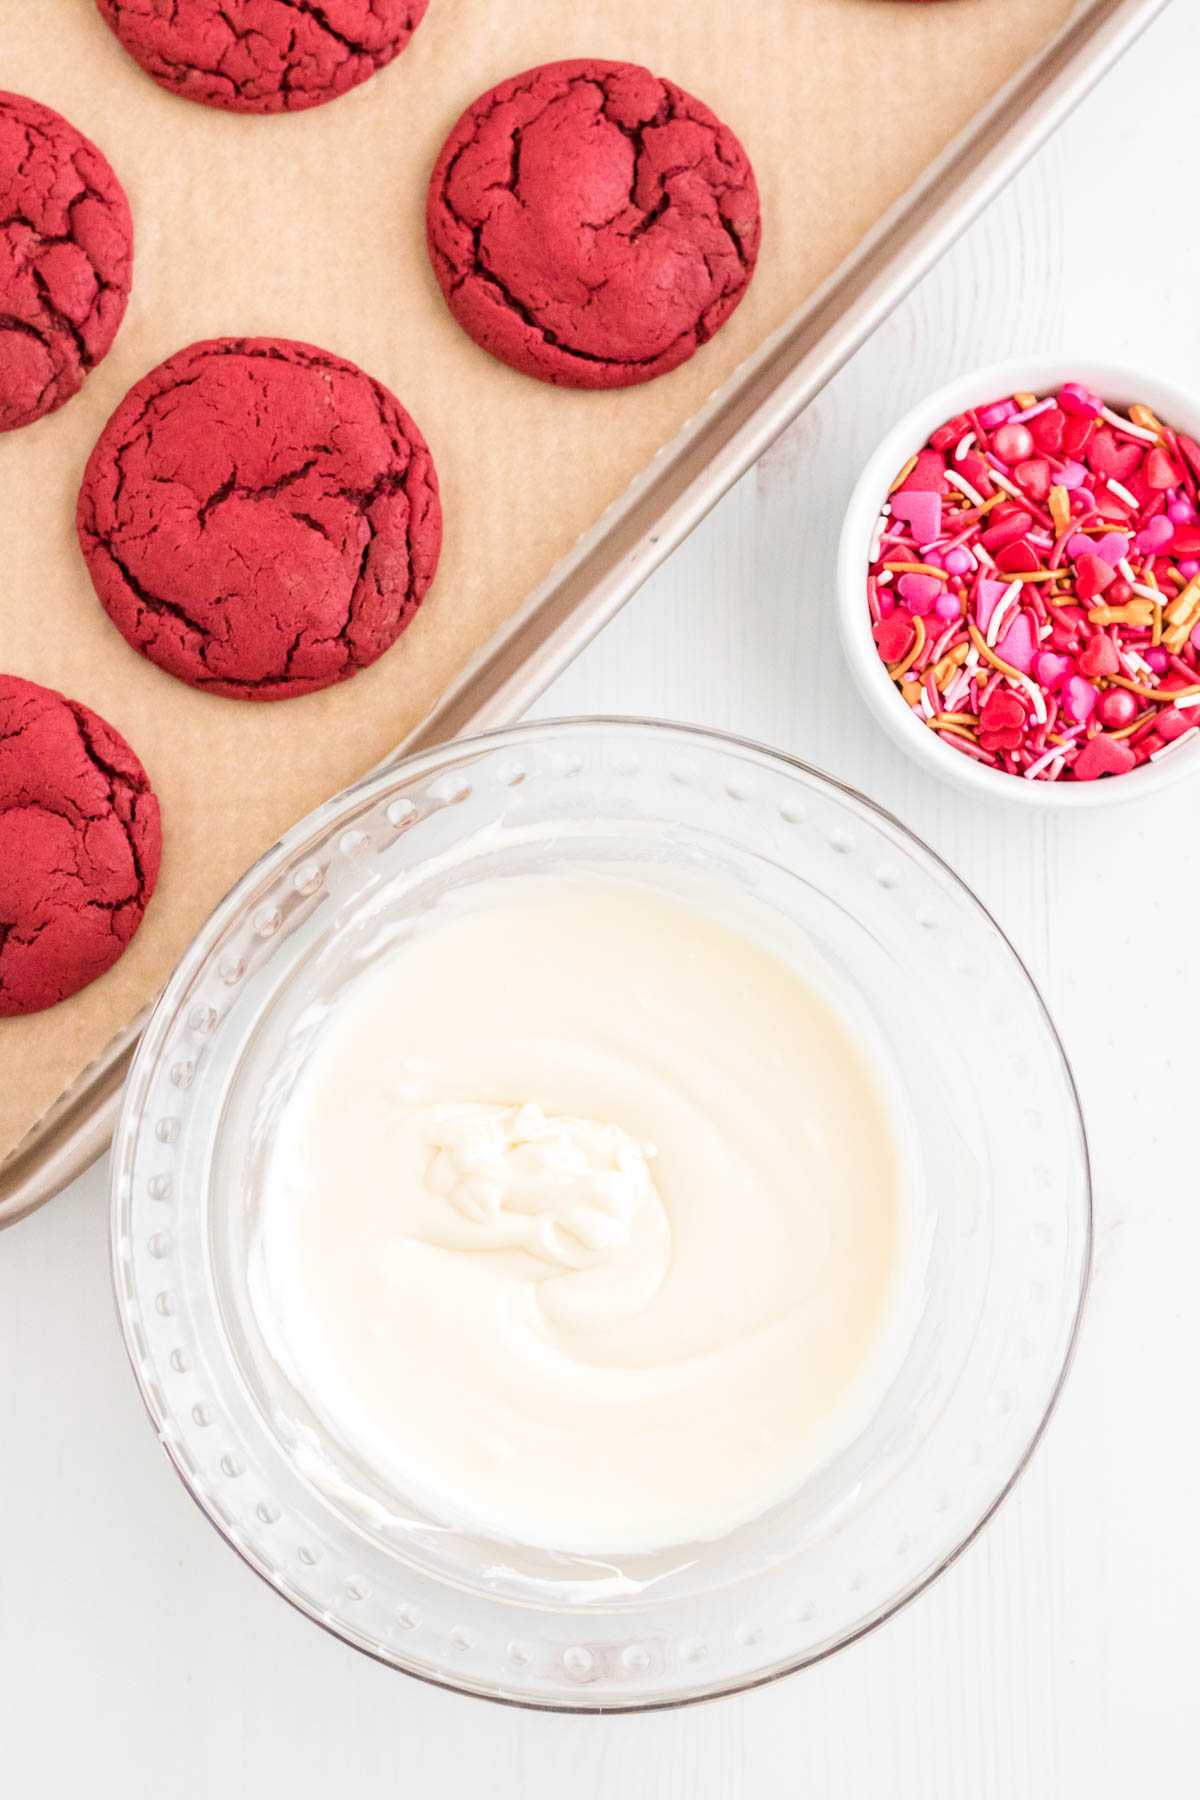 A bowl of melted white chocolate next to a baking sheet with red velvet cookies on it and a small bowl of sprinkles.